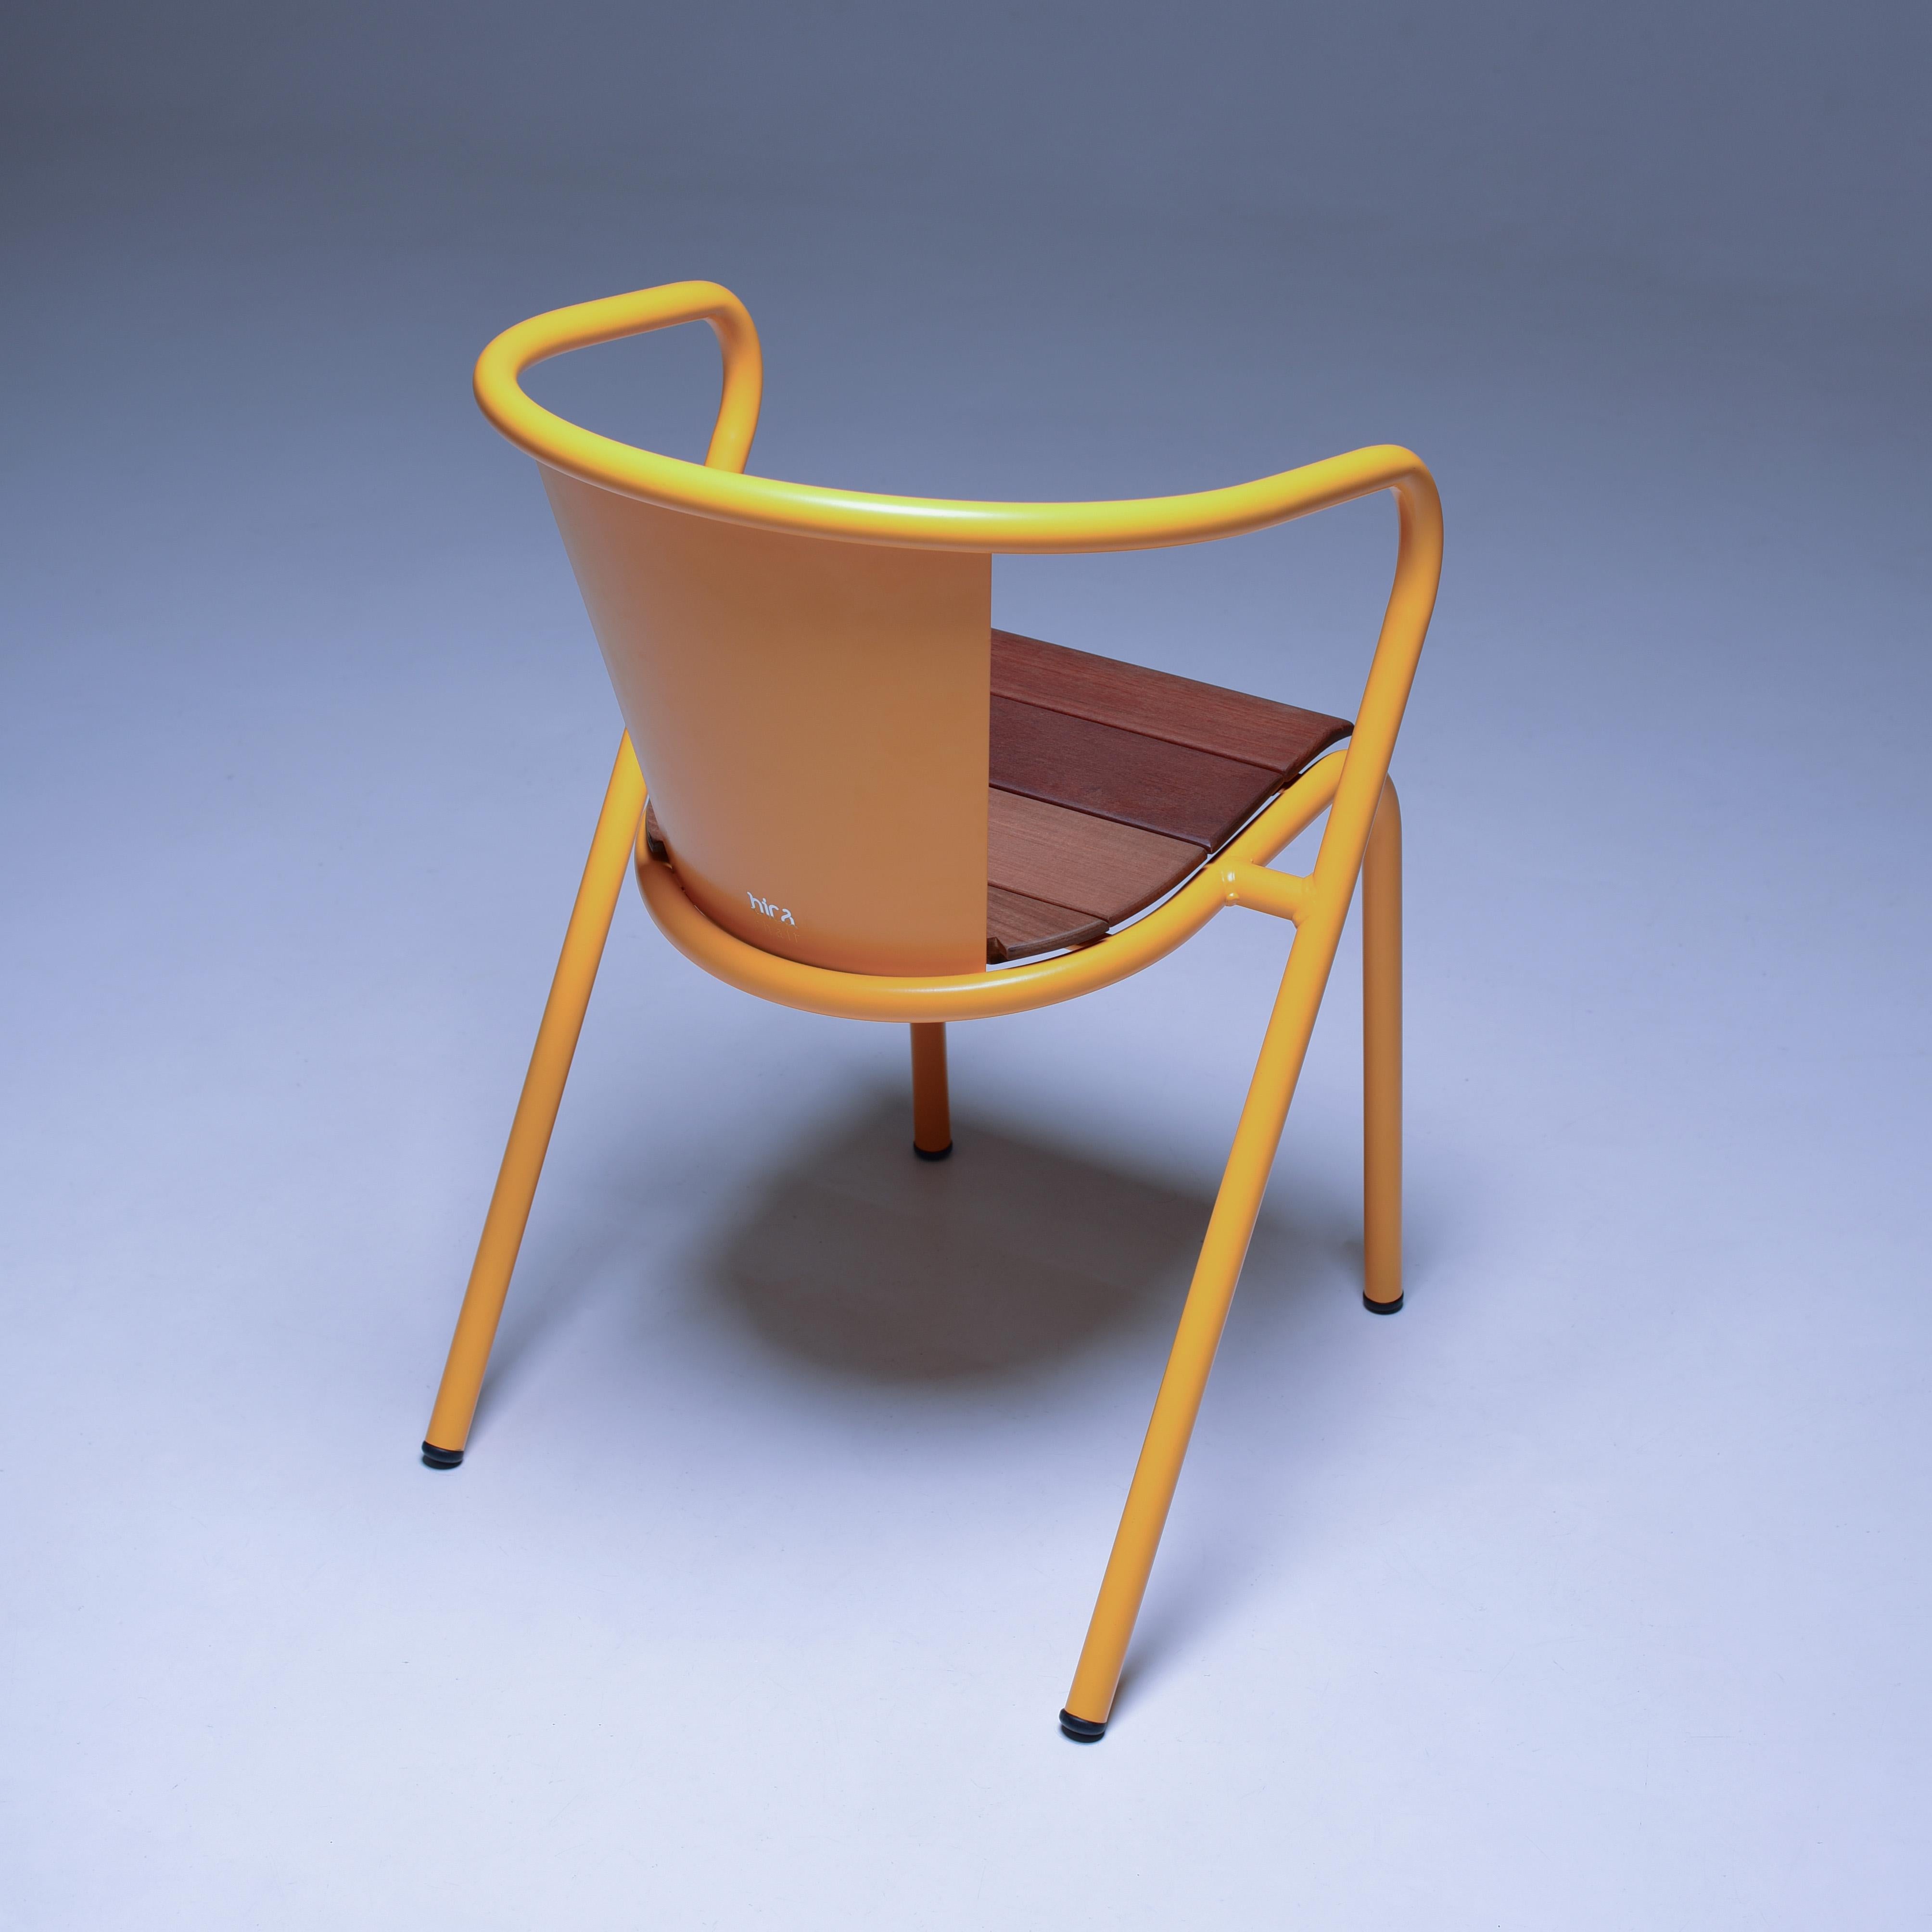 BICAchair is a sustainable stackable steel armchair made for the outdoors from recycled and recyclable steel and finished with our premium selection of powder-coating colors, in this case in a bright yellow color, that transforms a Classic in